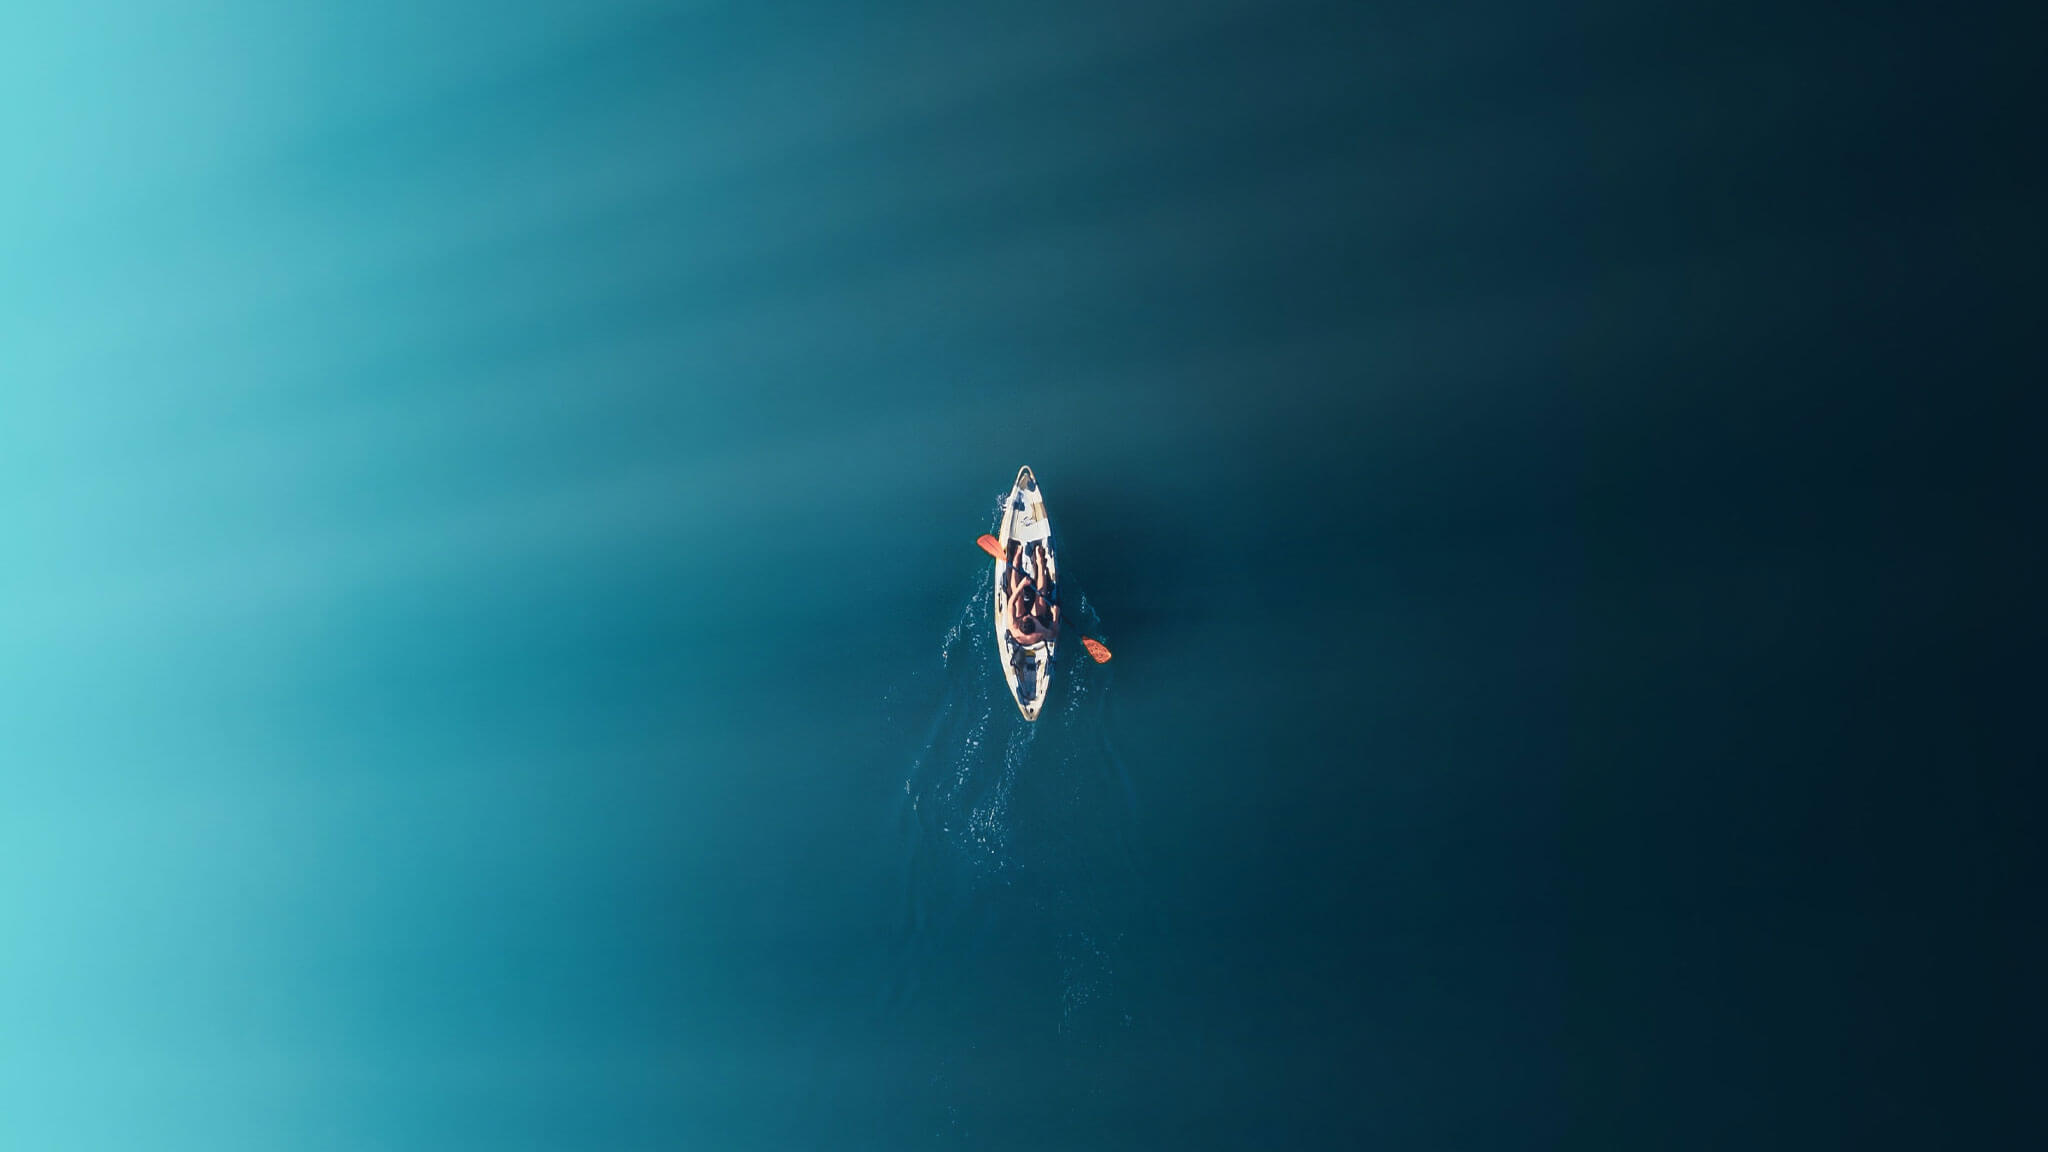 Aerial shot of person in canoe on still water